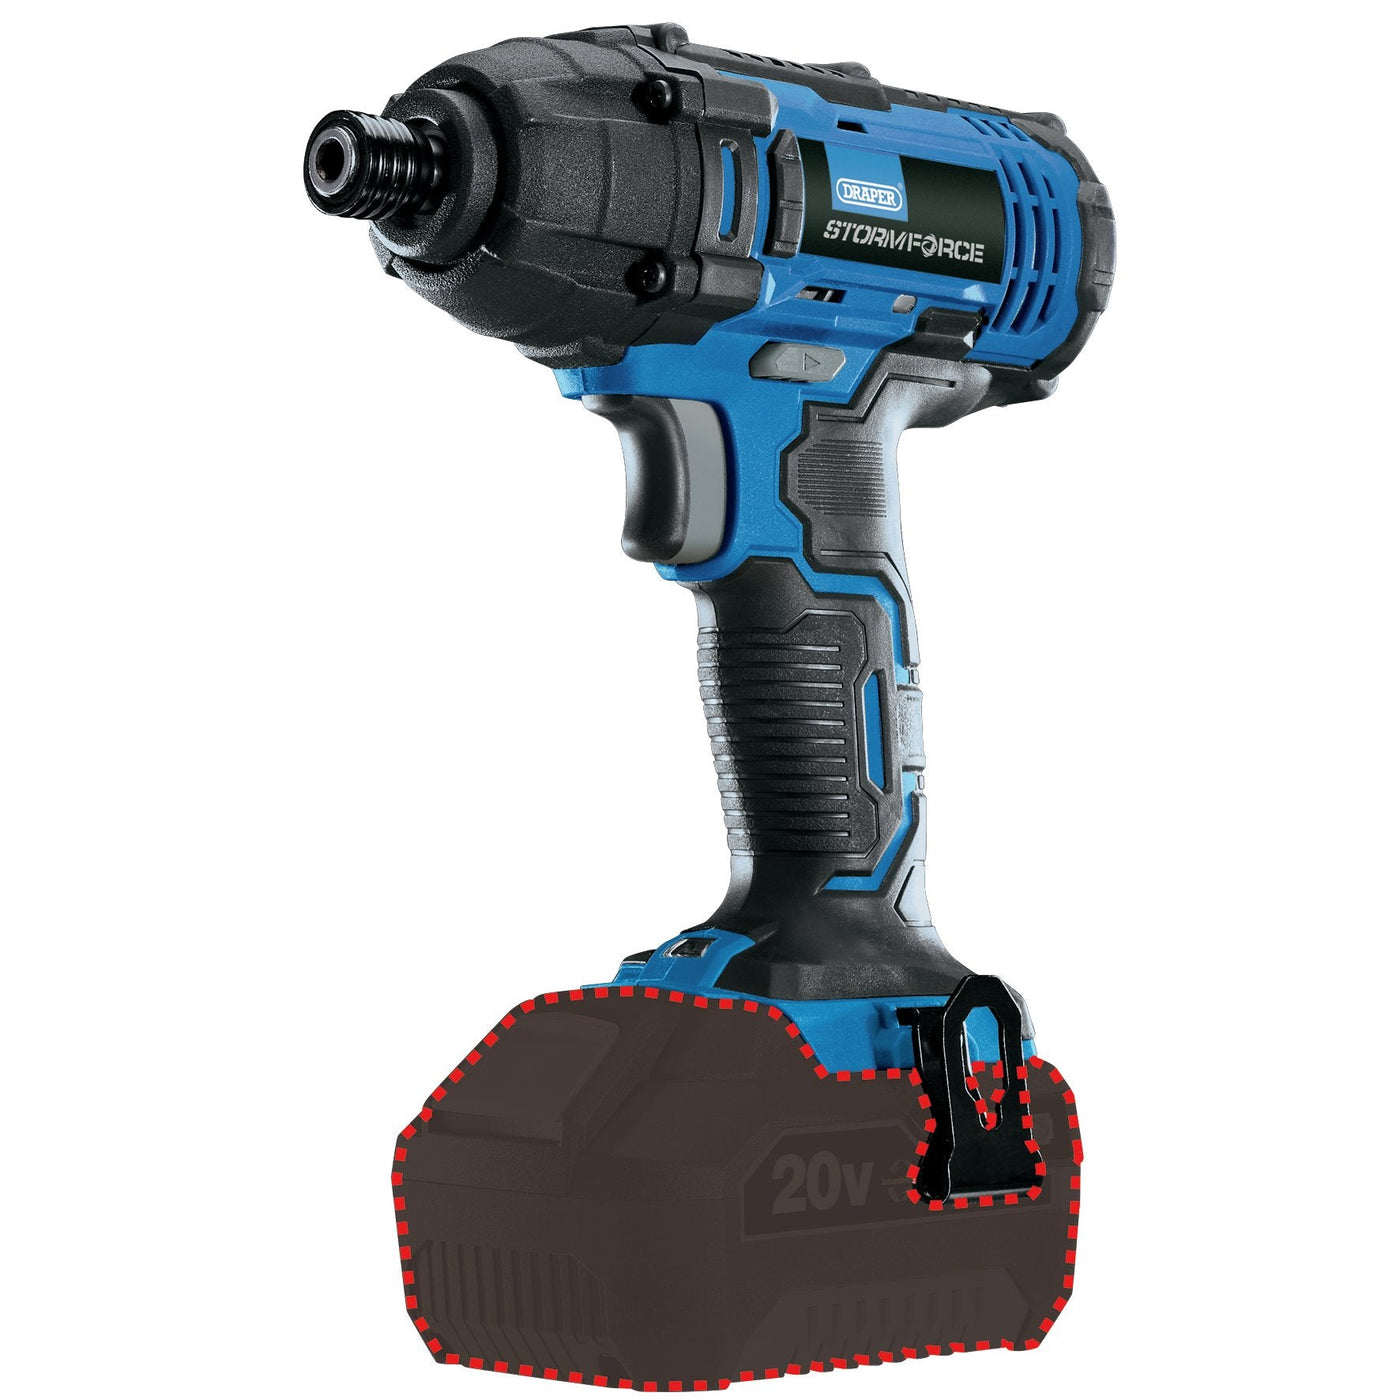 Draper 89520 Storm Force 20V Cordless Impact Driver, Body Only